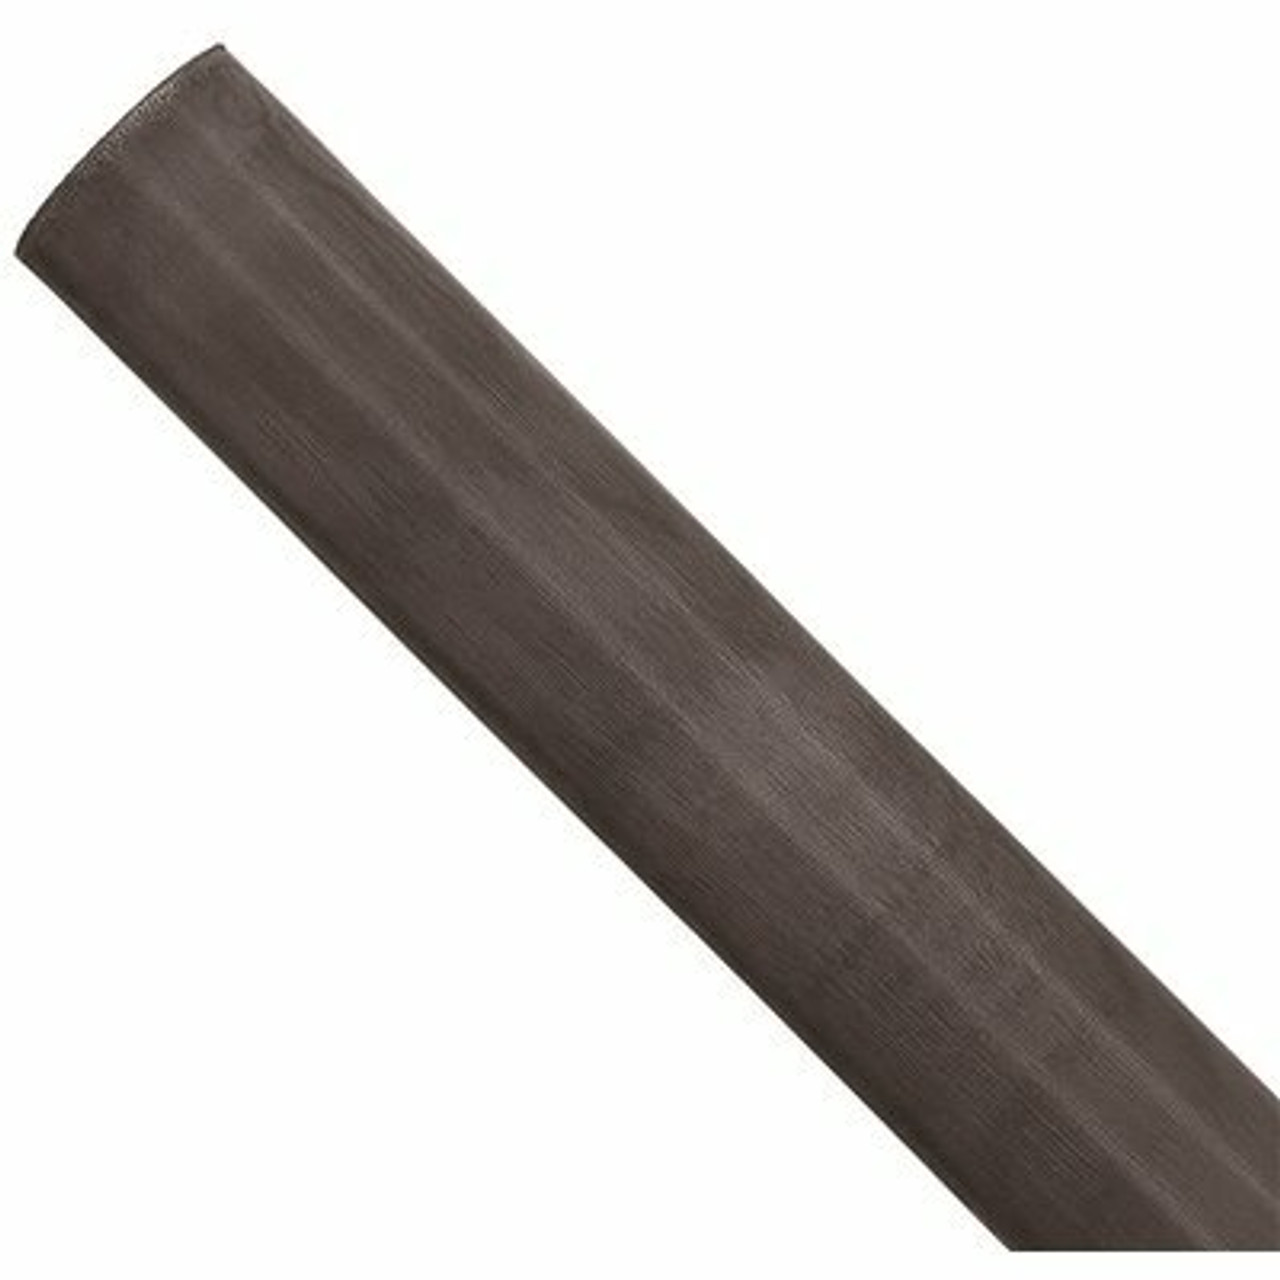 Saint-Gobain Adfors 48 In. X 100 Ft. Charcoal Aluminum Screen Roll For Windows And Door